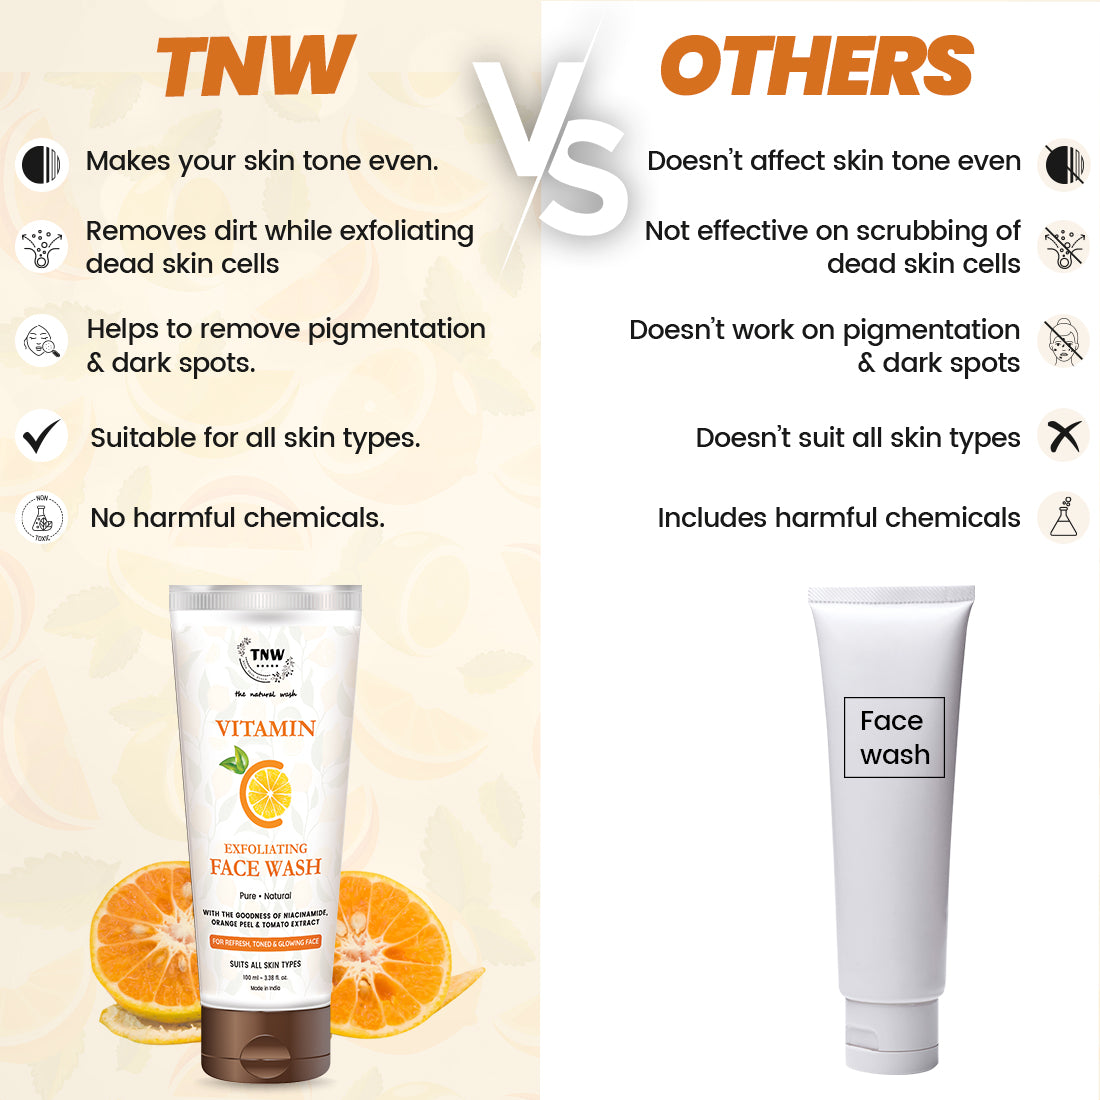 Difference between TNW Vitamin C Face Wash Vs Others Vitamin C Face Wash